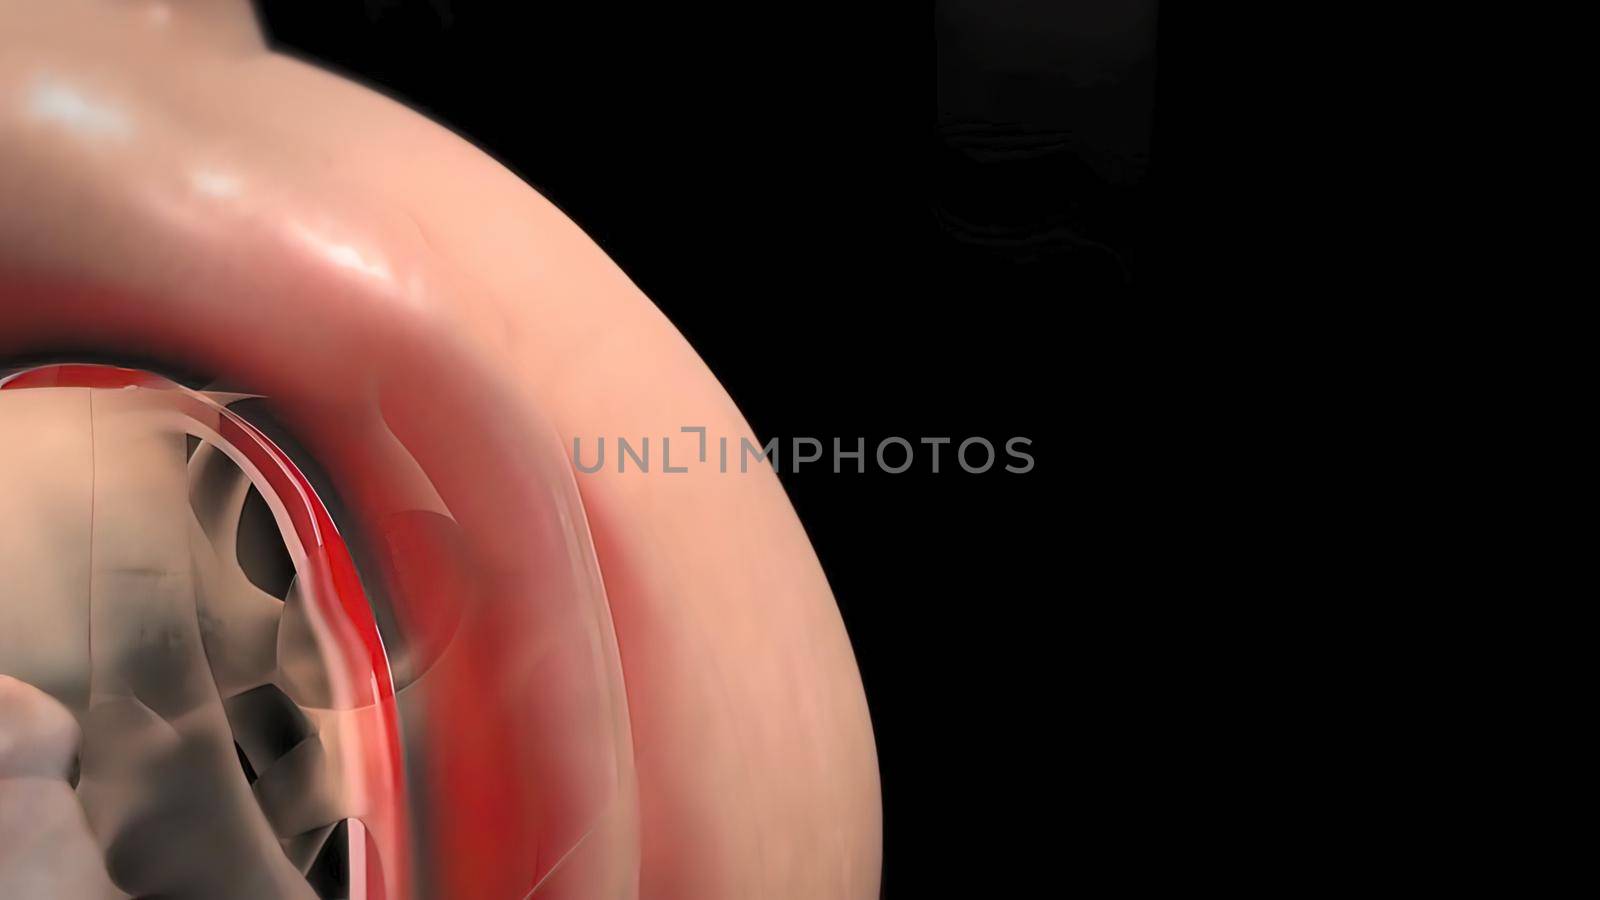 Aortic aneurysm and aortic dissection 3D Render